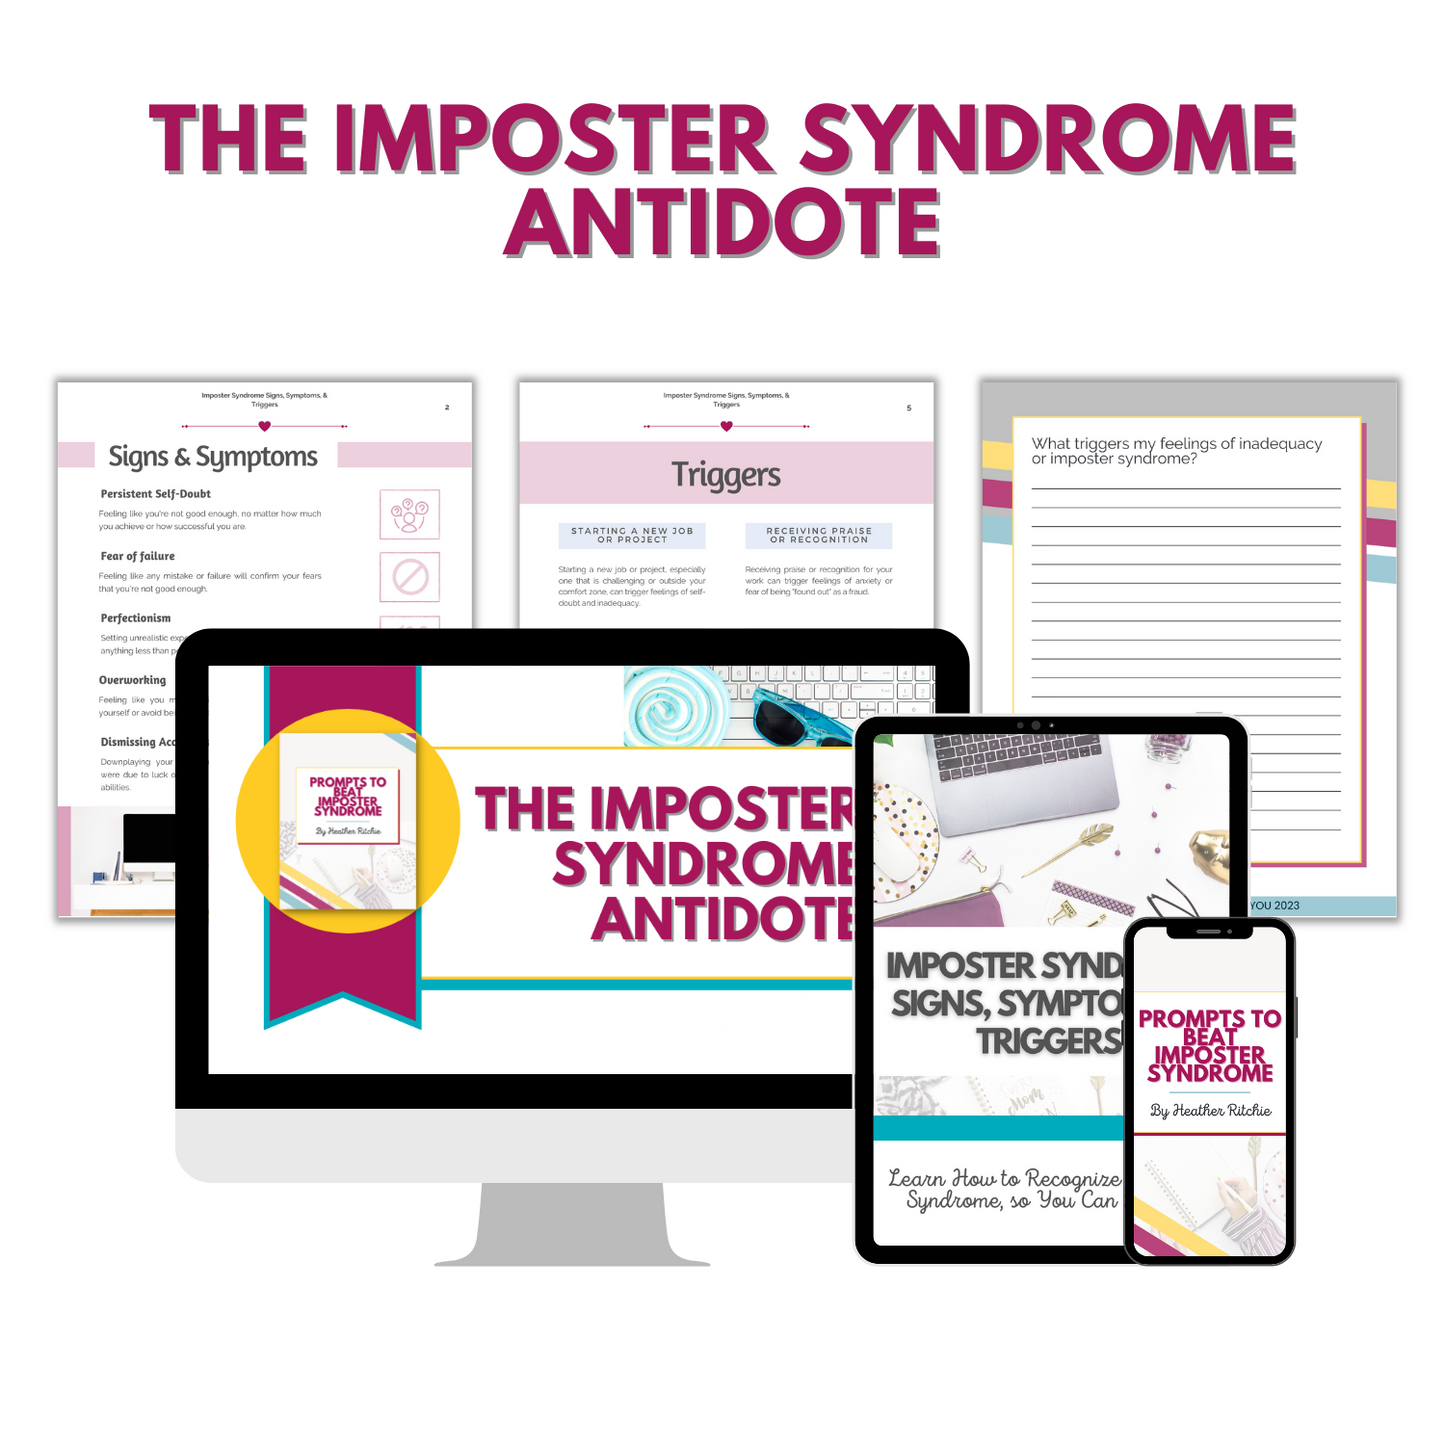 The Imposter Syndrome Antidote